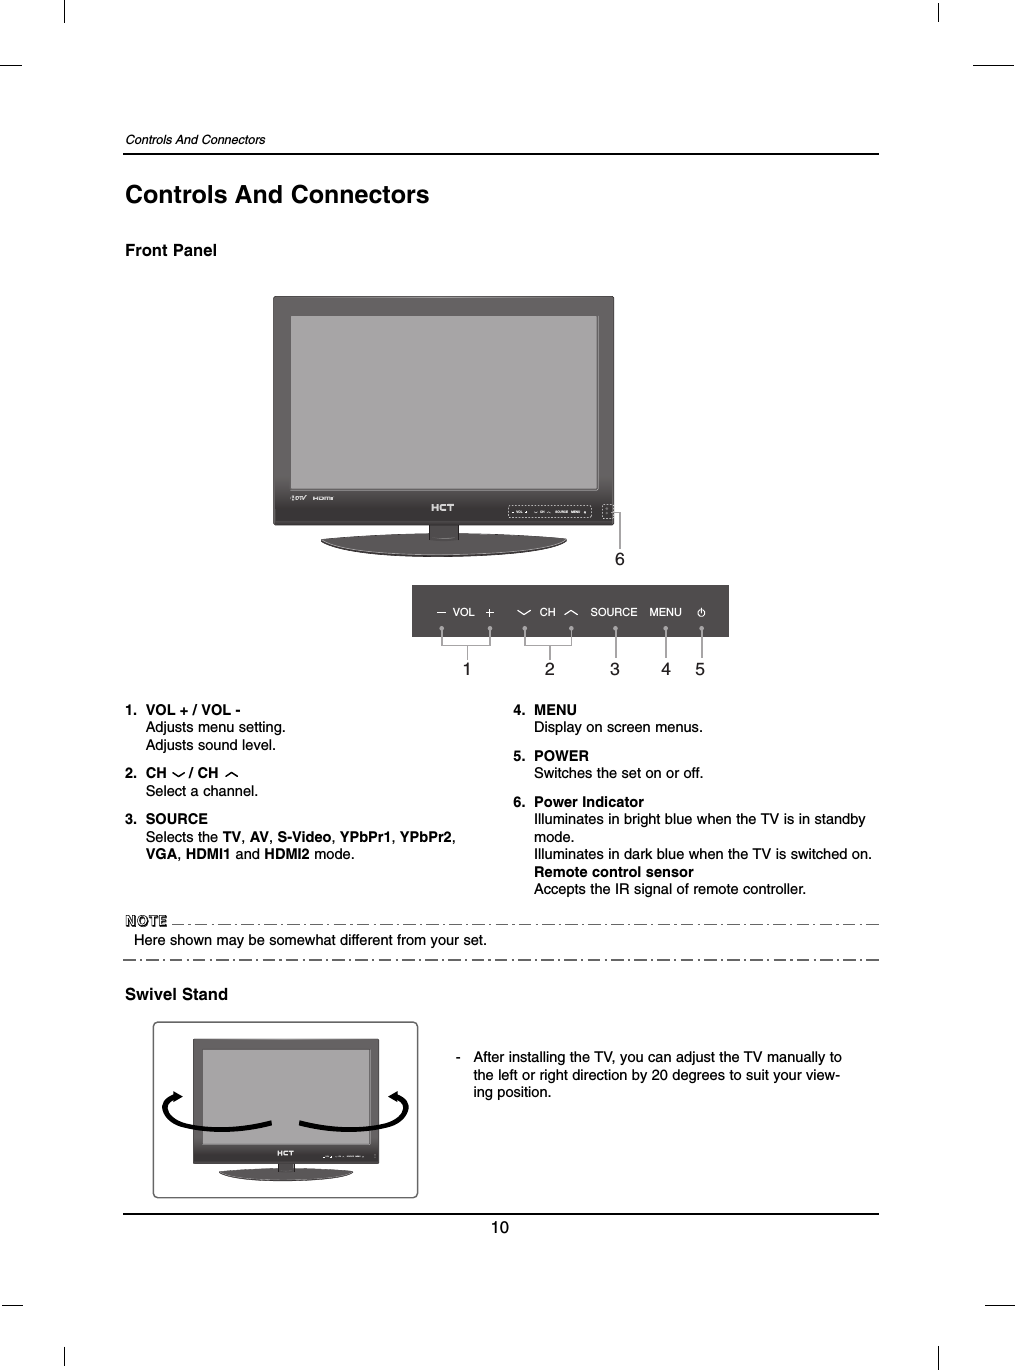 Controls And Connectors10Controls And ConnectorsFront PanelVOL SOURCE MENUCH12345VOL SOURCE MENUCH61. VOL + / VOL -Adjusts menu setting.Adjusts sound level.2. CH     / CH Select a channel.3. SOURCESelects the TV, AV,S-Video,YPbPr1,YPbPr2,VGA,HDMI1 and HDMI2 mode.4. MENUDisplay on screen menus.5. POWERSwitches the set on or off.6. Power IndicatorIlluminates in bright blue when the TV is in standbymode.Illuminates in dark blue when the TV is switched on.Remote control sensorAccepts the IR signal of remote controller.Here shown may be somewhat different from your set.NNNNOOOOTTTTEEEESwivel StandVOL SOURCE MENUCH-After installing the TV, you can adjust the TV manually tothe left or right direction by 20 degrees to suit your view-ing position.